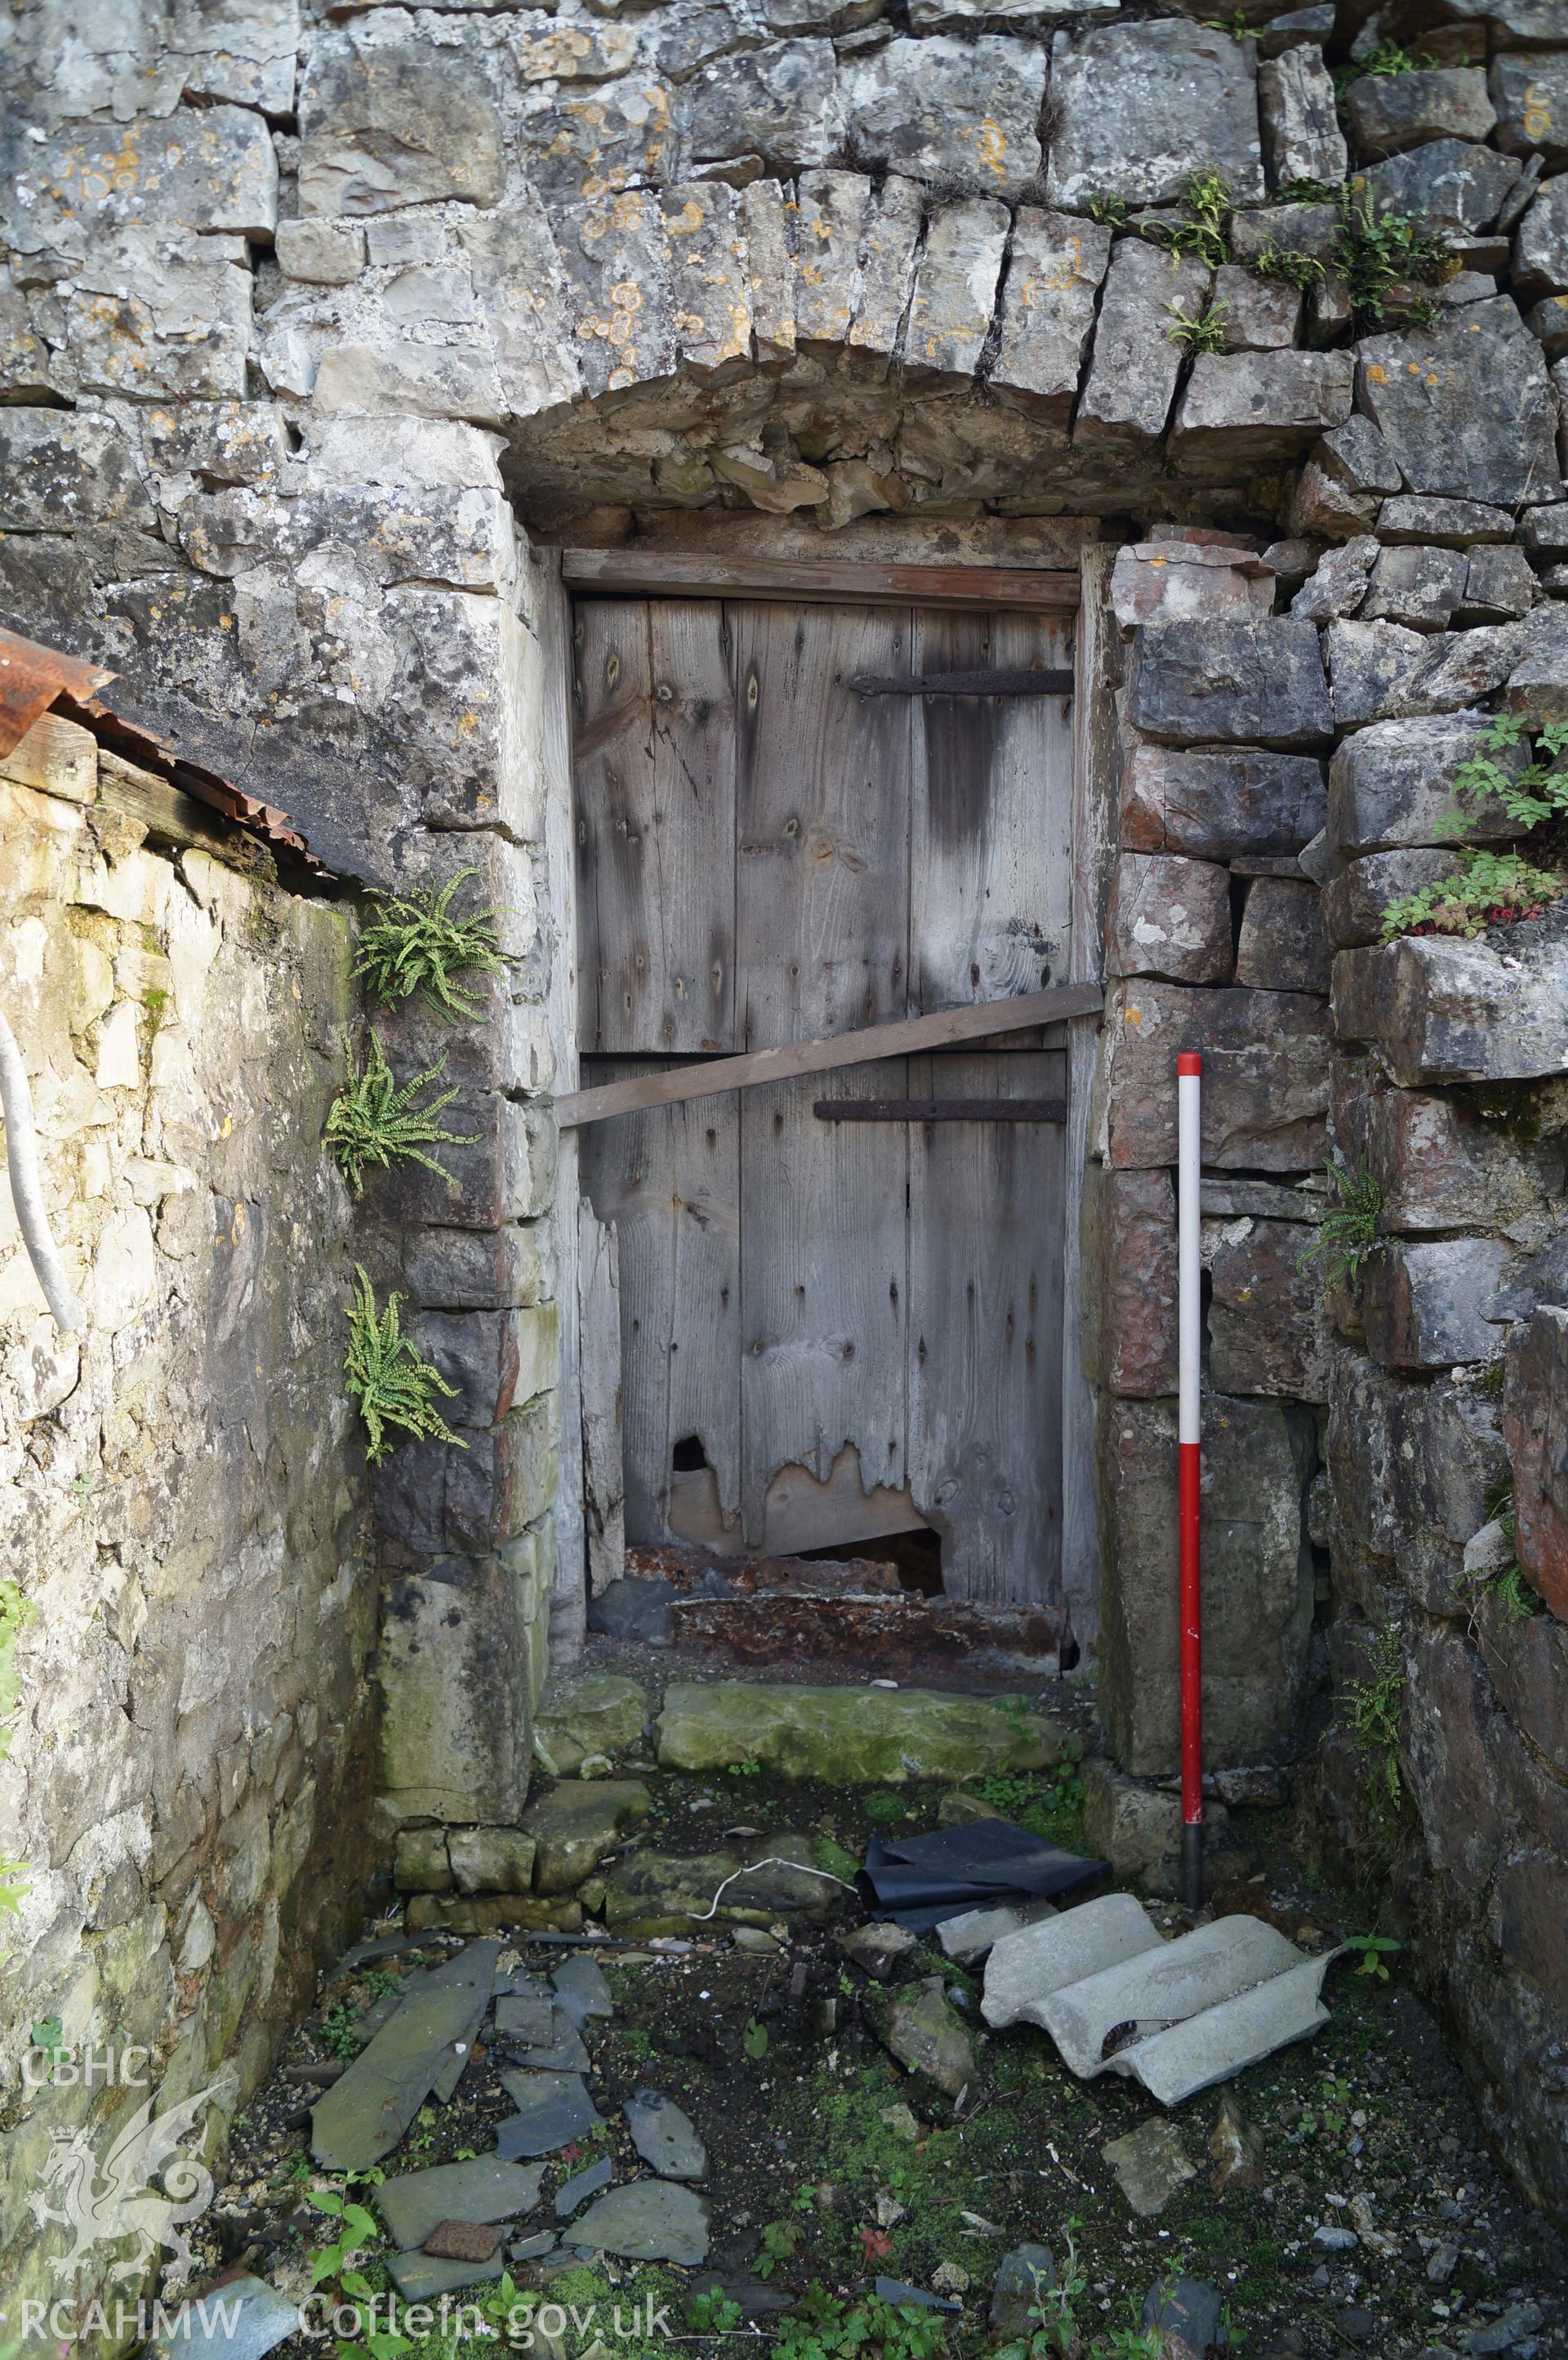 View 'looking south southeast at the doorway in the northern side of barn' at Rowley Court, Llantwit Major. Photograph & description by Jenny Hall & Paul Sambrook of Trysor, 7th September 2016.